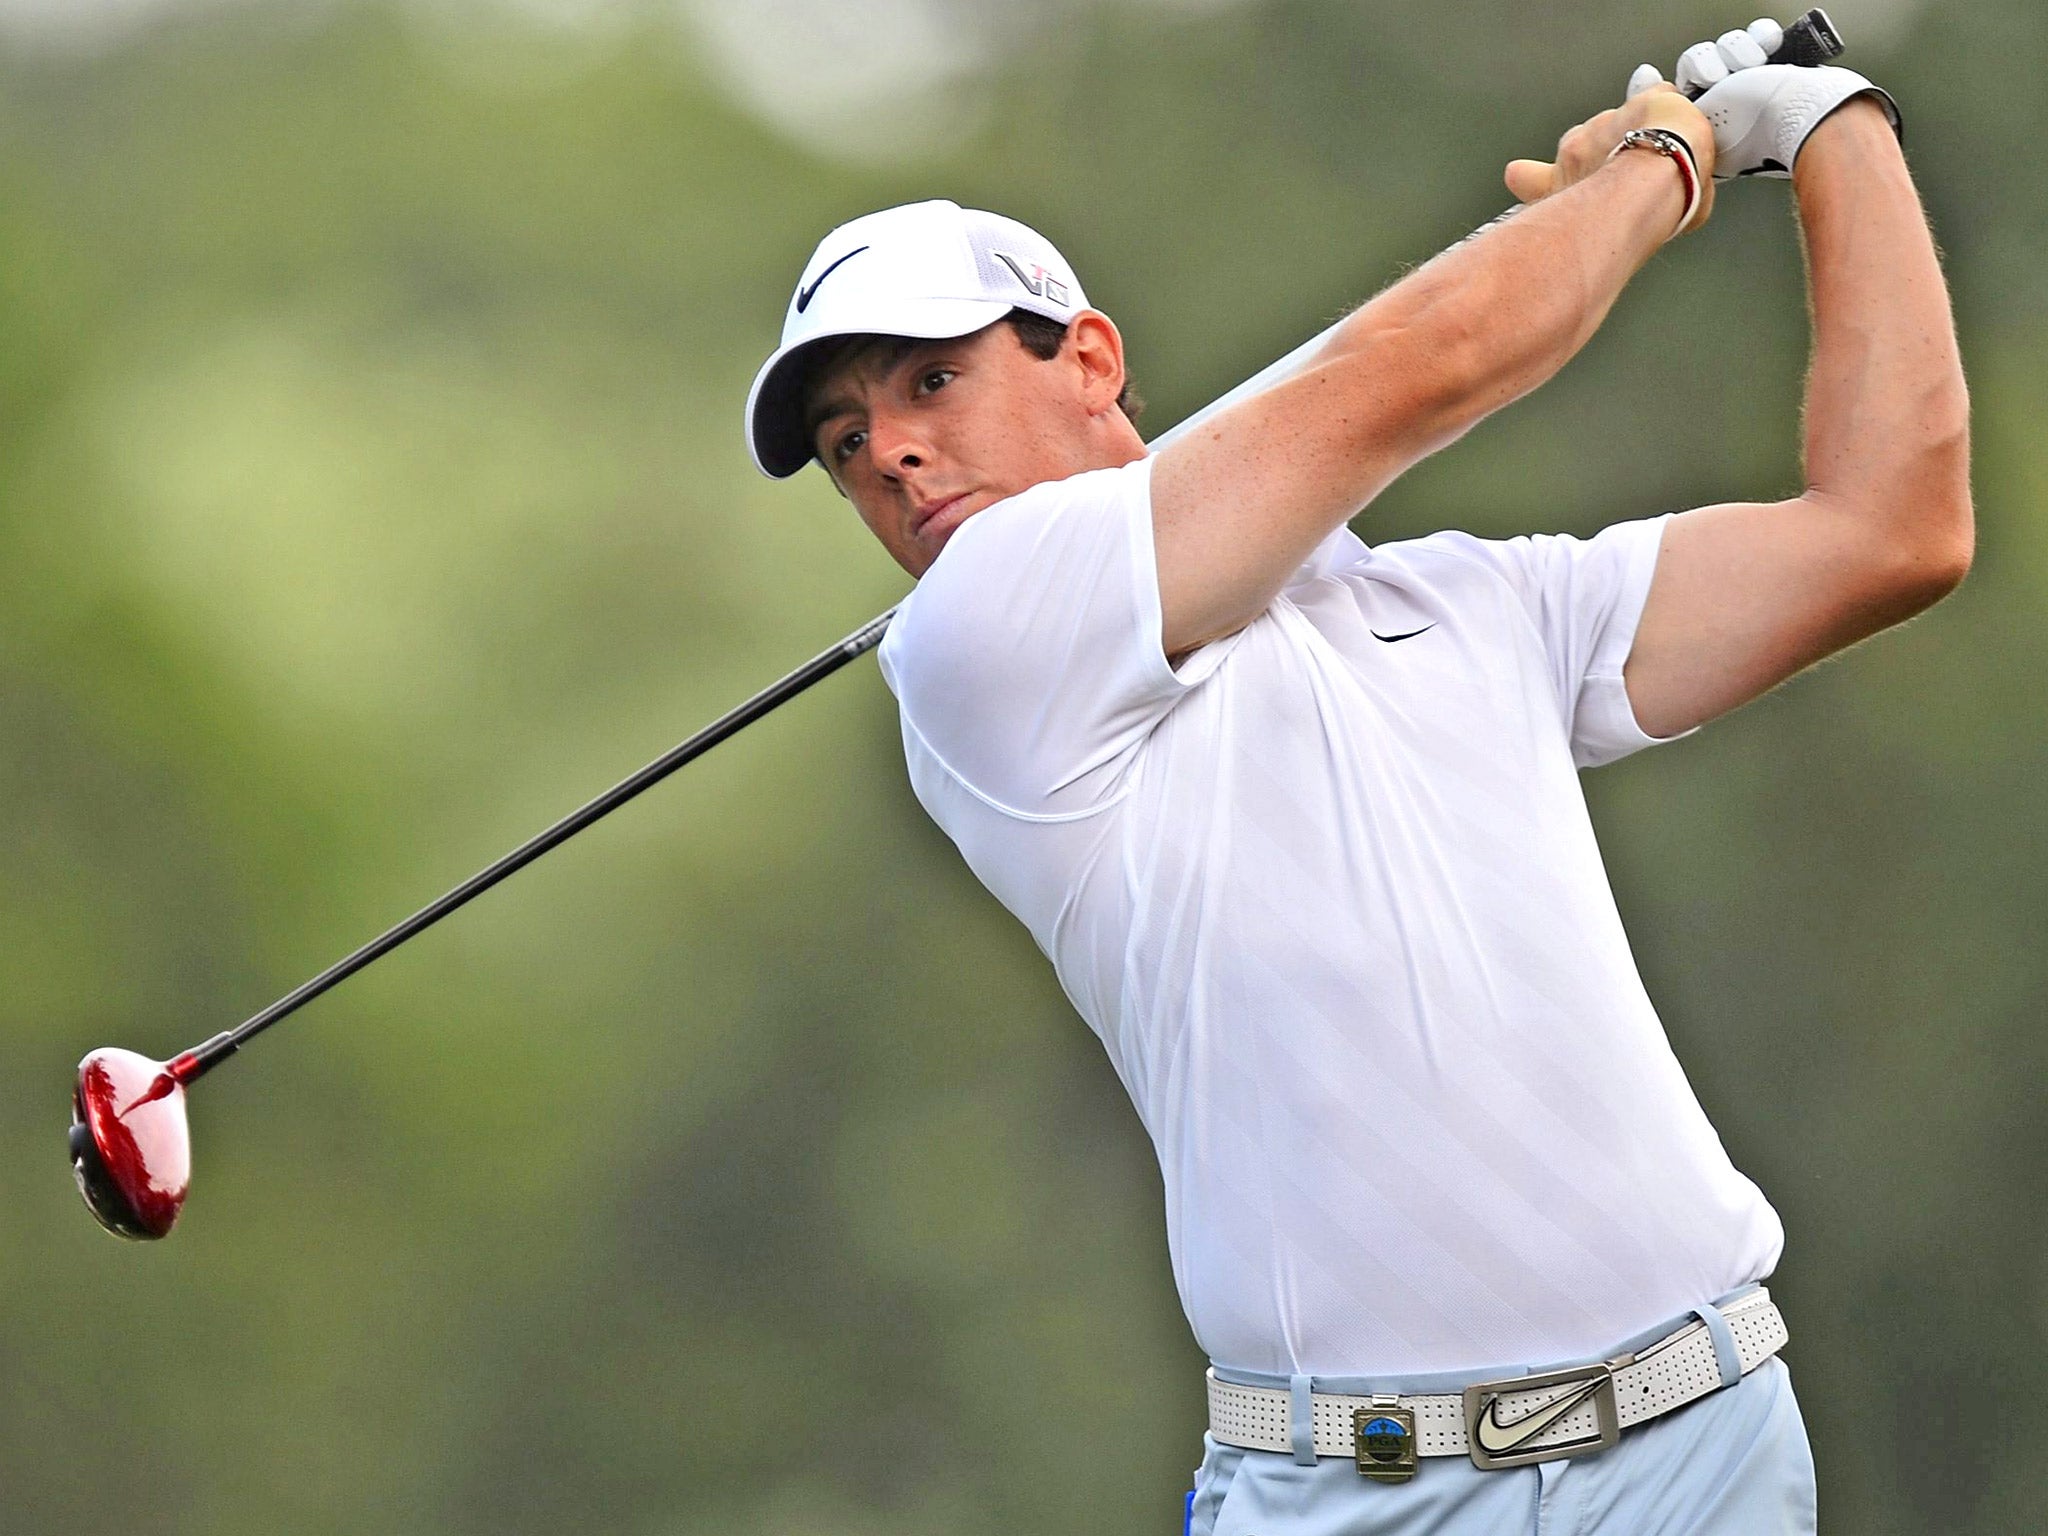 Rory McIlroy hits a tee shot at Oak Hill during practice